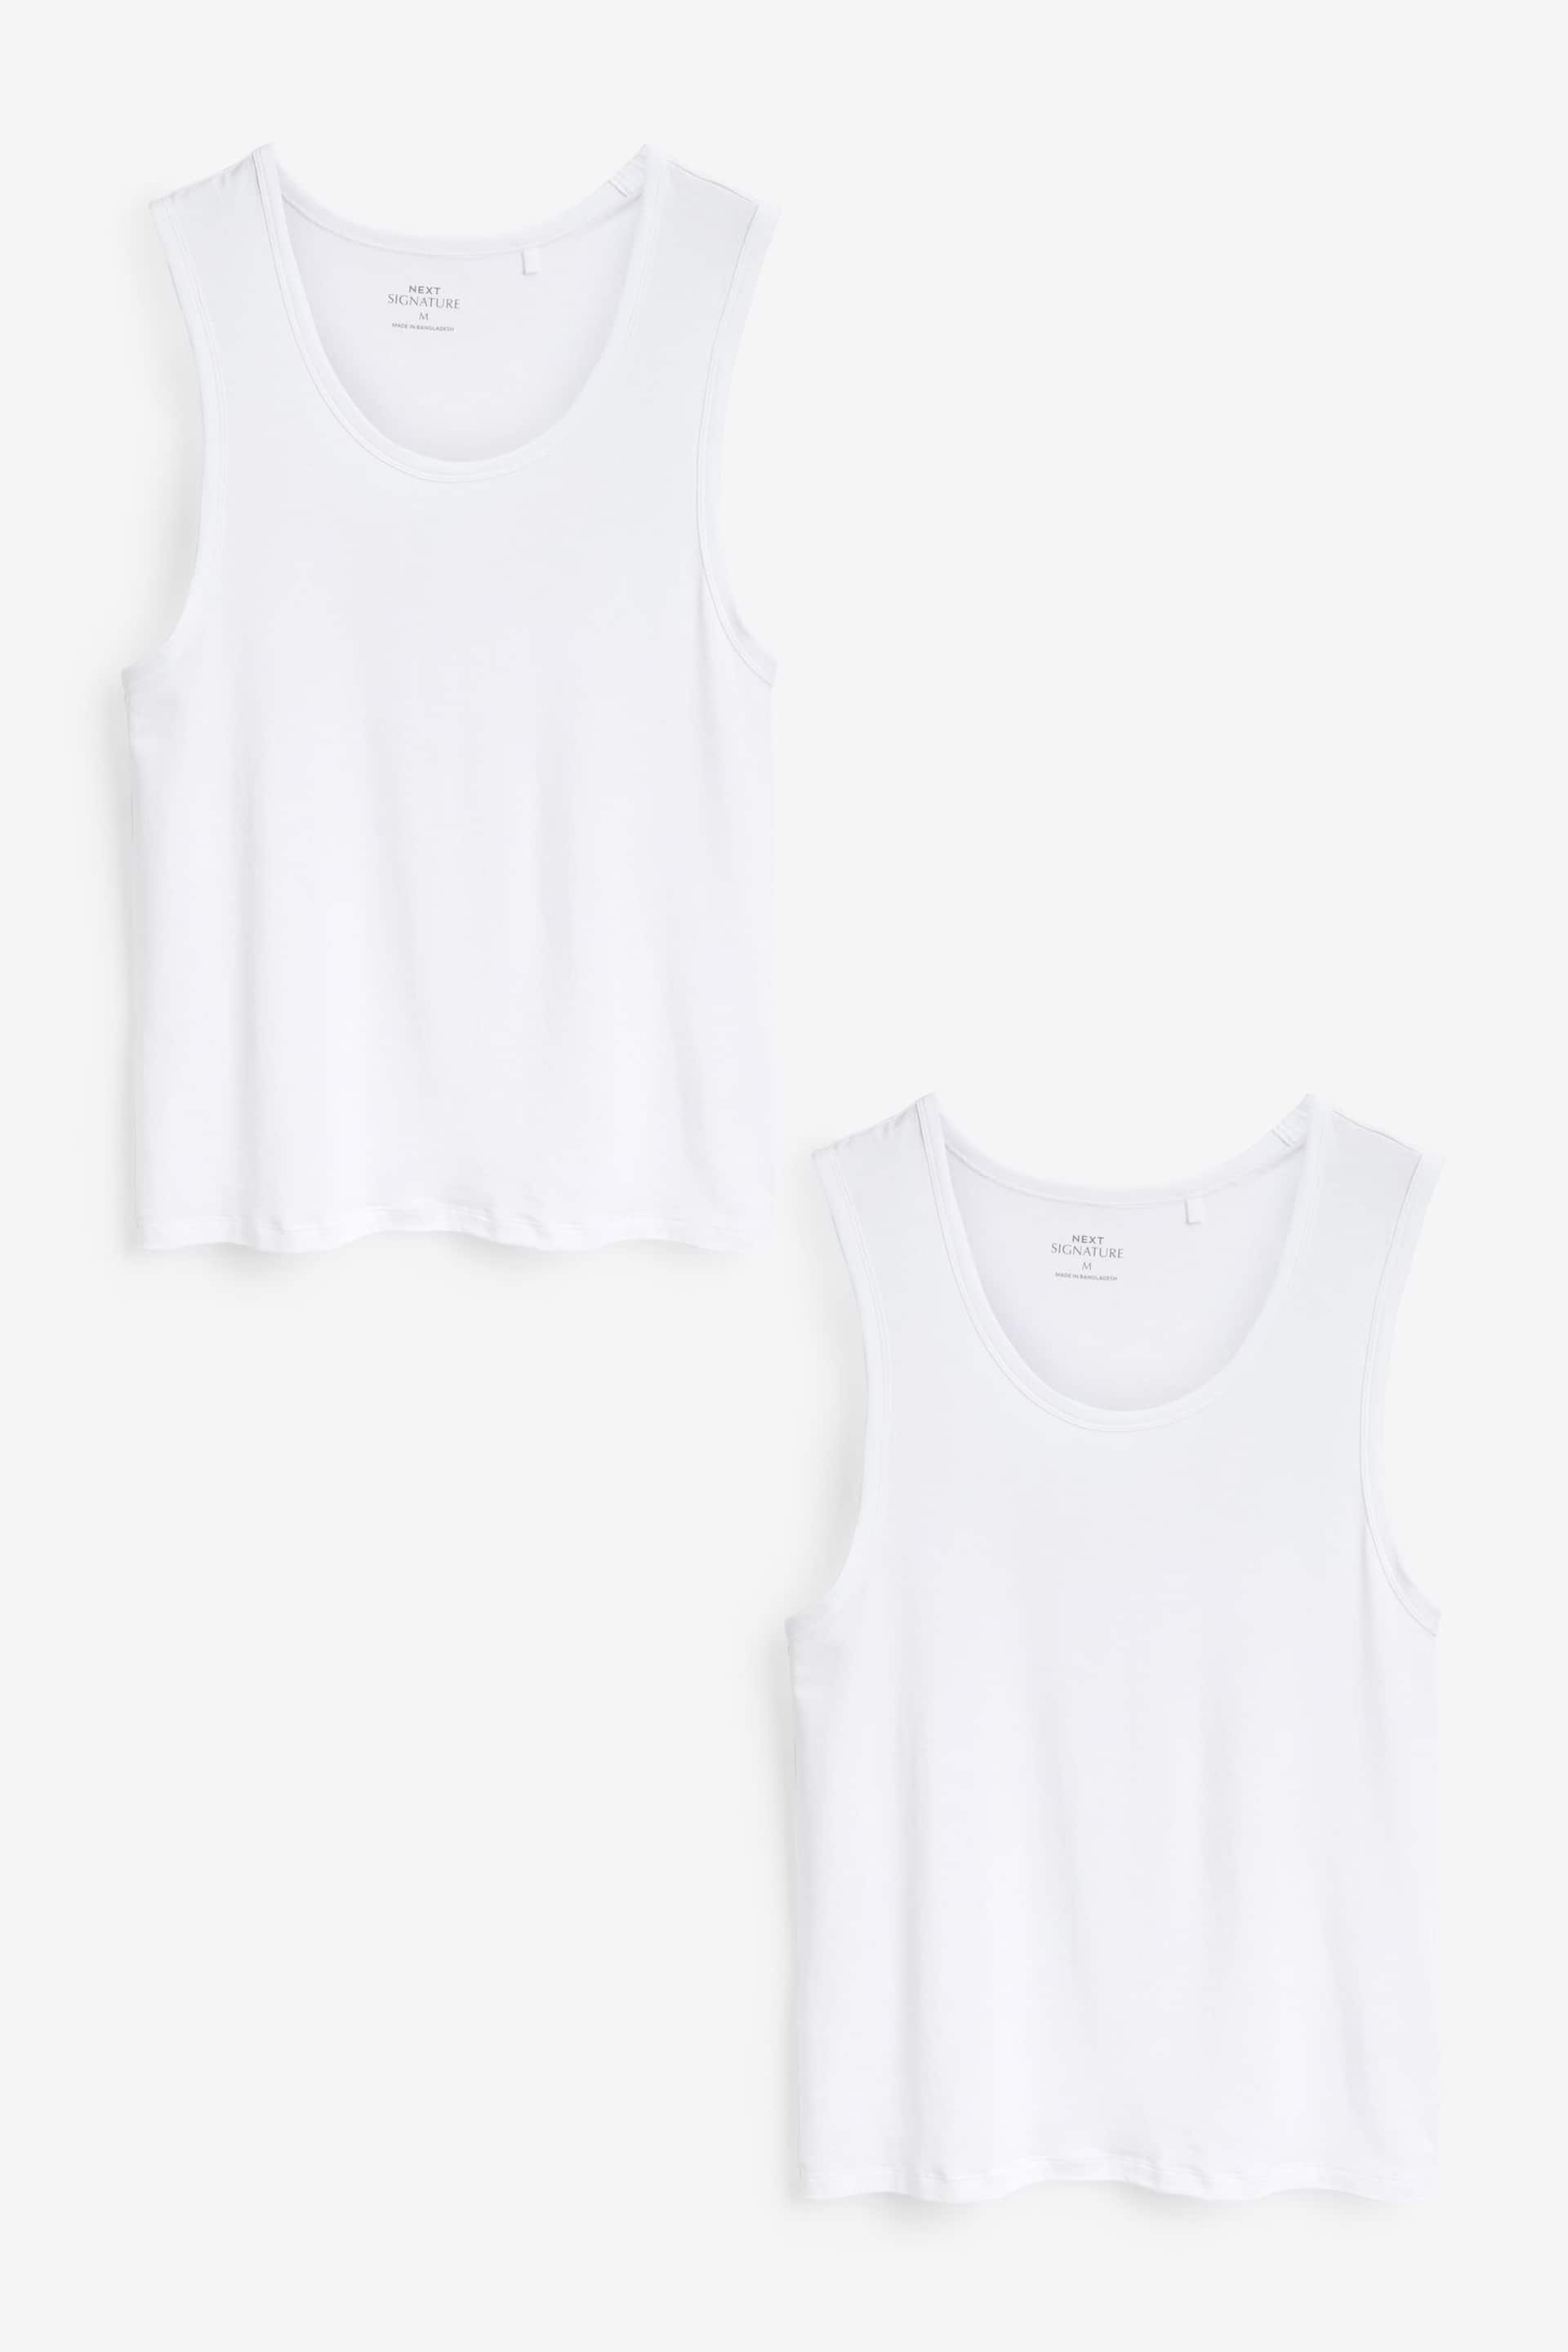 White 2 Pack Signature Bamboo Vests - Image 4 of 4